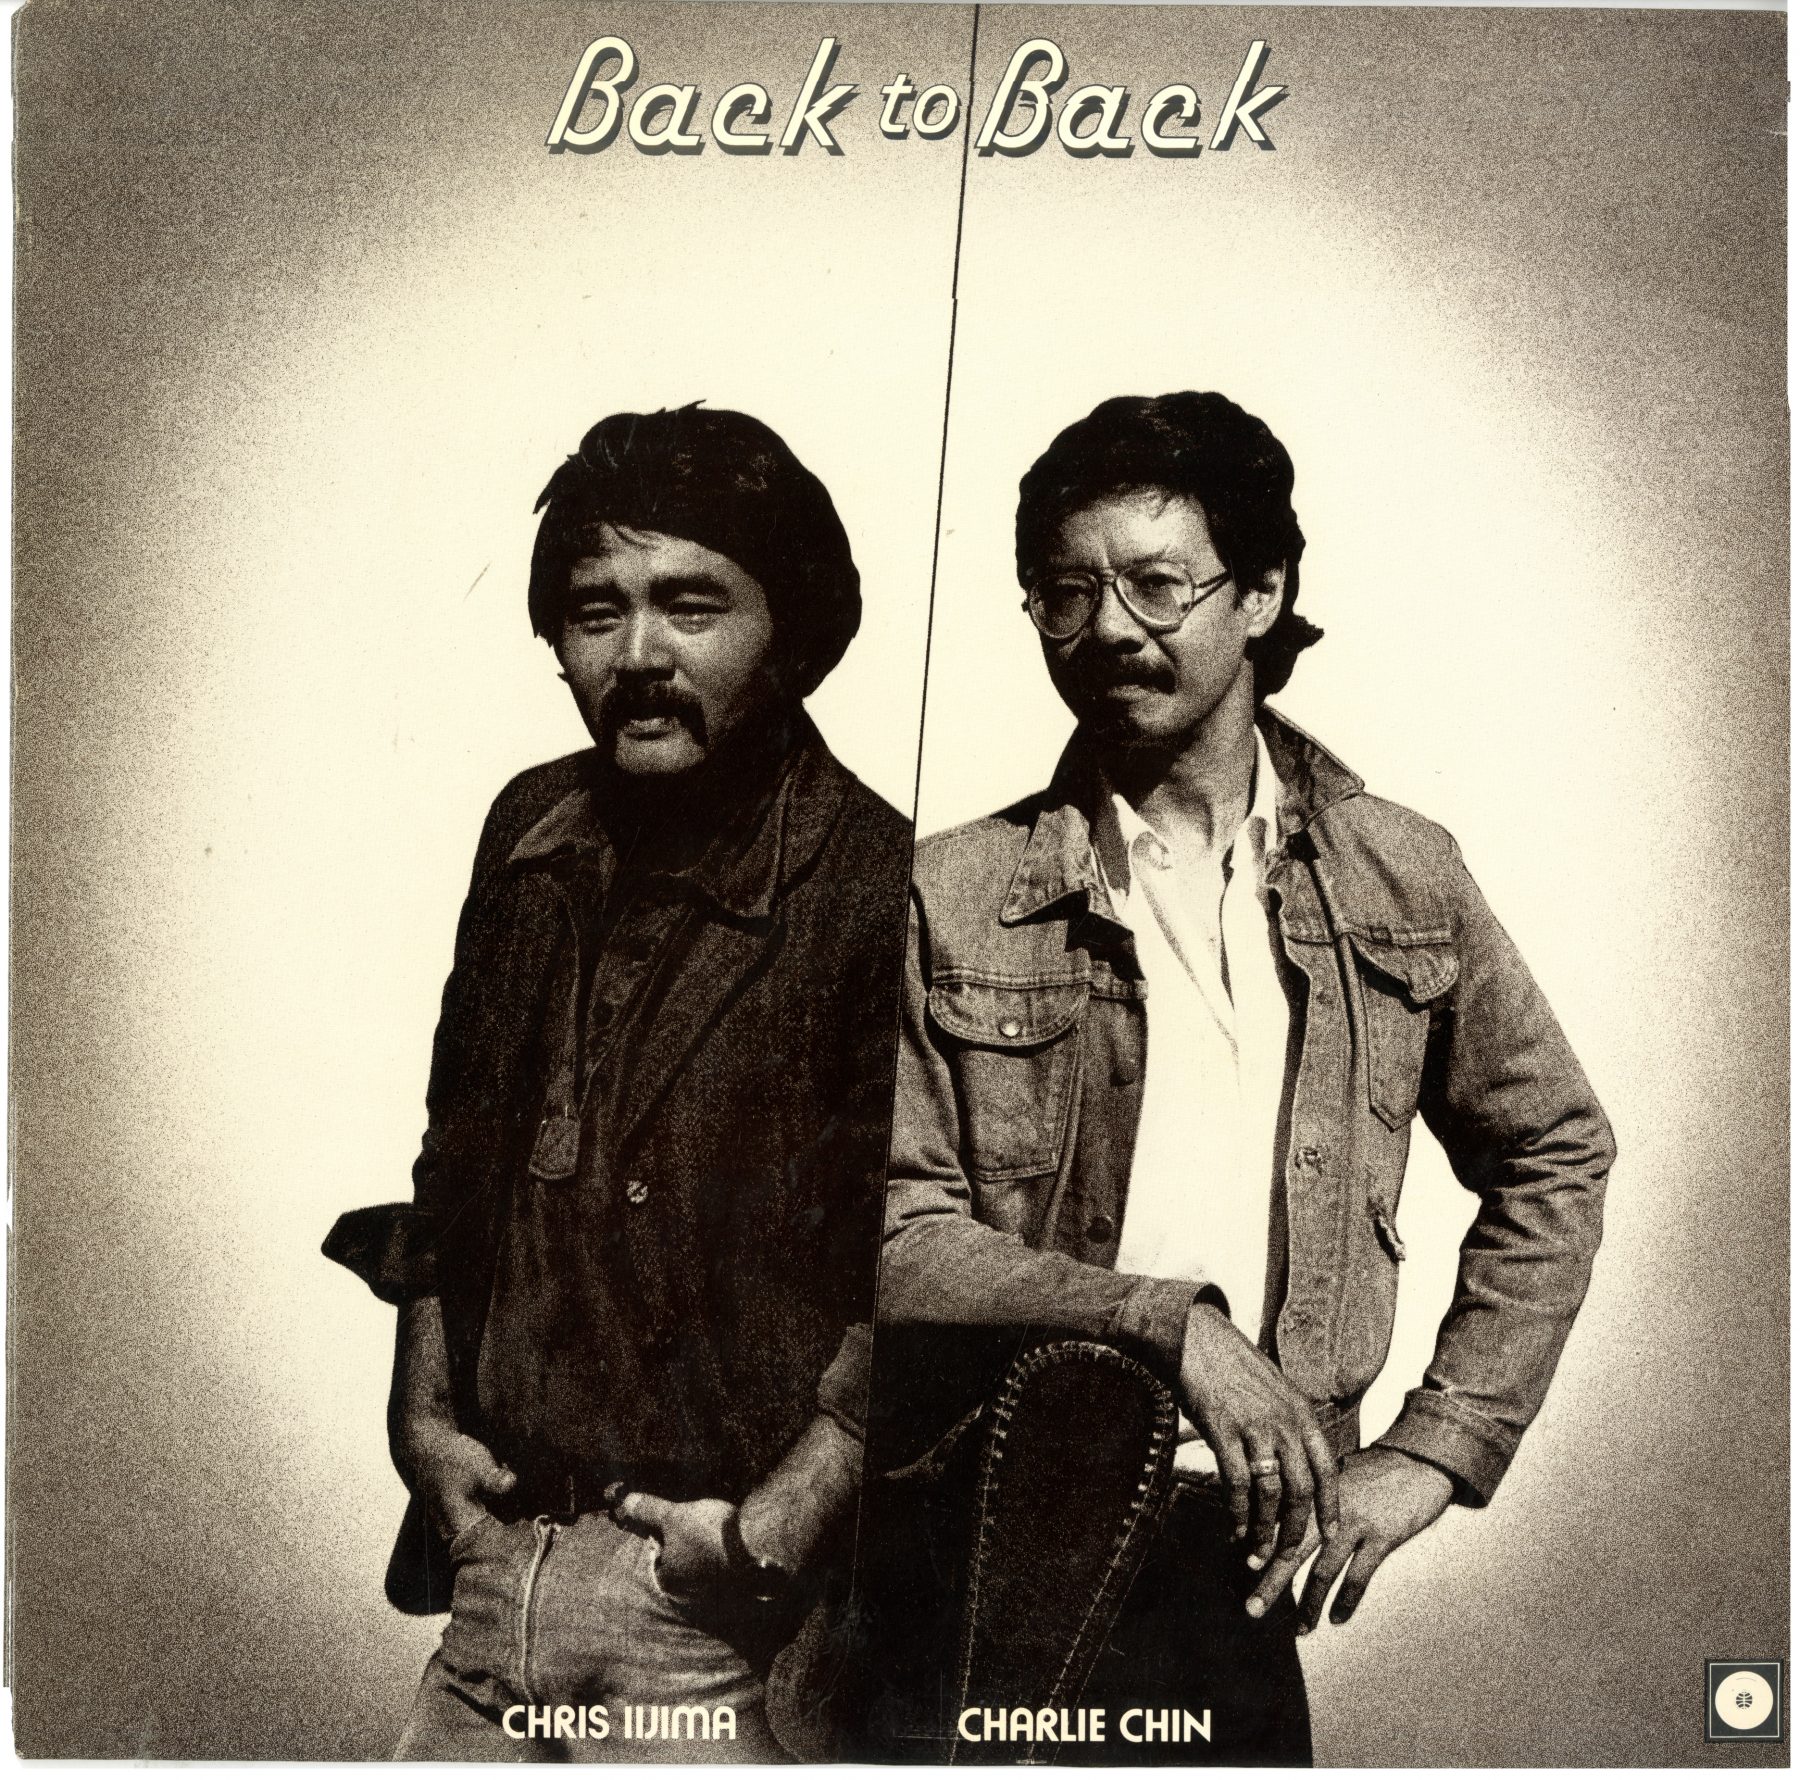 21 May 2019 Posted.
Chris Iijima & Charlie Chin on the Cover of Album Back to Back, Courtesy of Henry Chu, Museum of Chinese in America (MOCA) Collection.
克里斯·饭岛和陈建文在专辑《背靠背》封面上，Henry Chu捐赠，美国华人博物馆（MOCA）馆藏